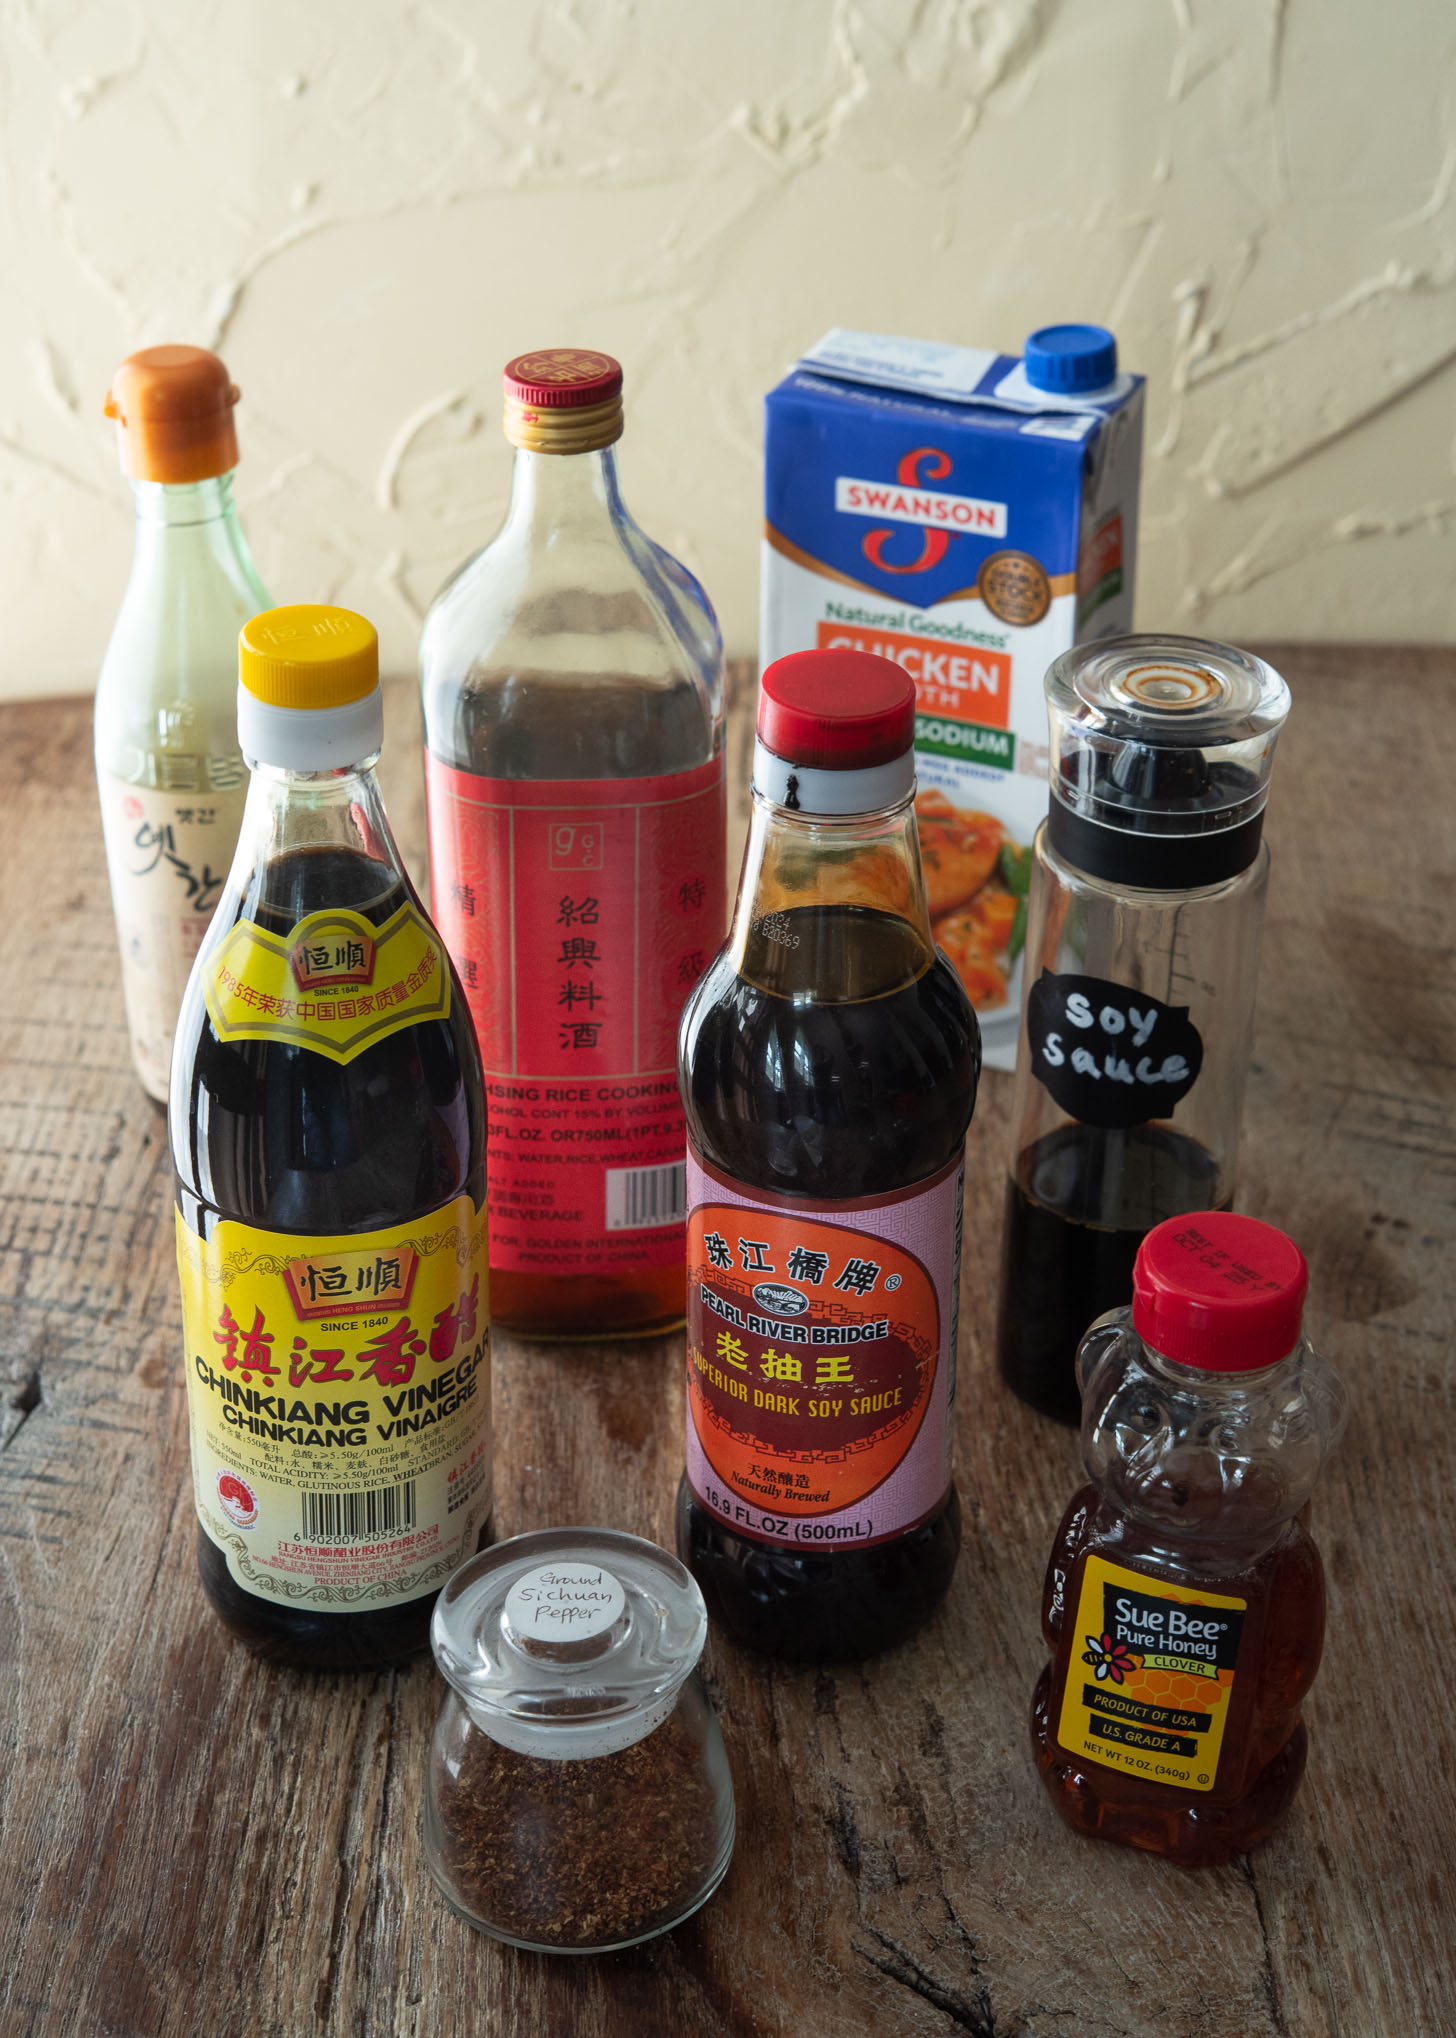 Condiments presented for making Kung Pao sauce.